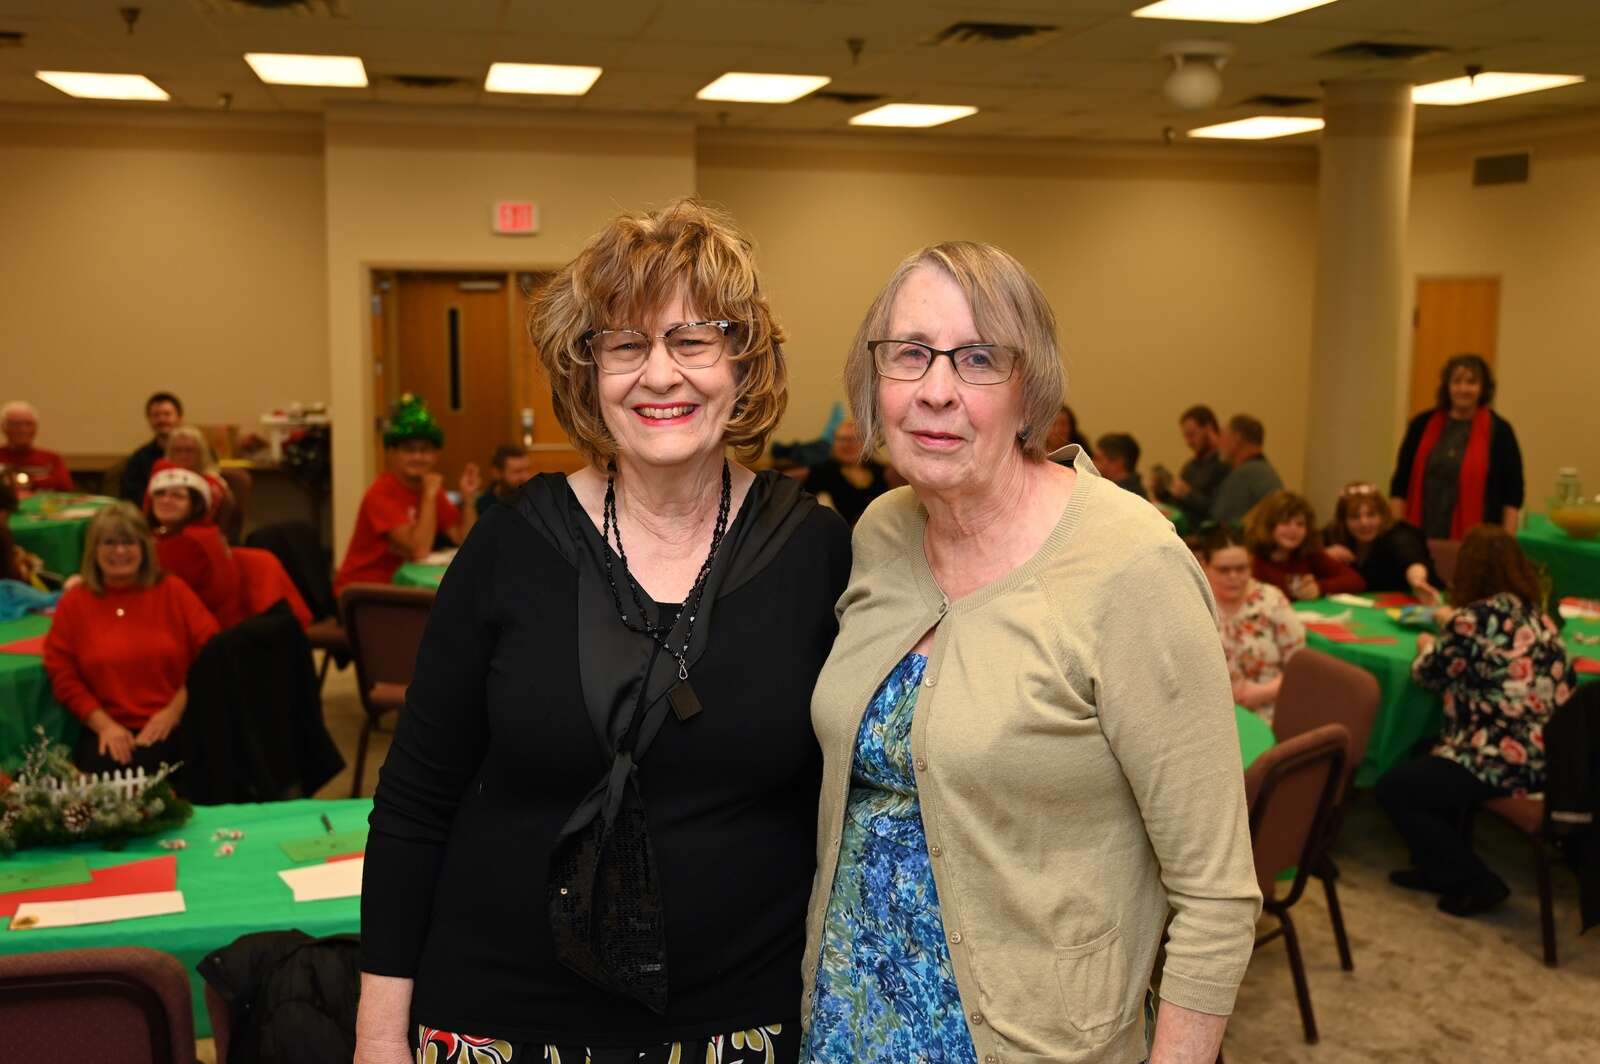 Founders of the Butler Friendship Circle group Nancy Robertson and Christine Braho